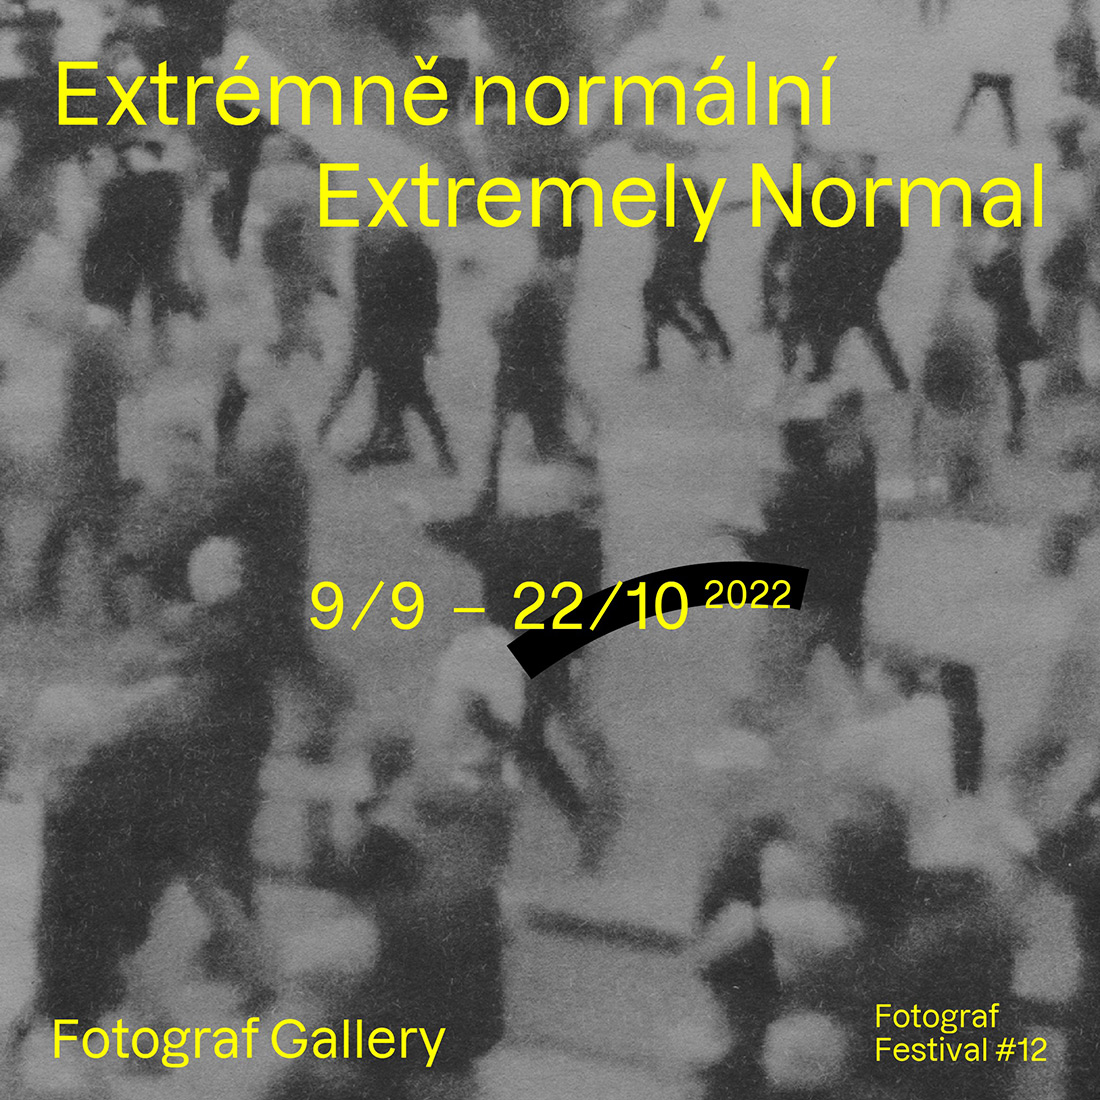 Opening “Extremely Normal” at Fotograf Gallery Prague